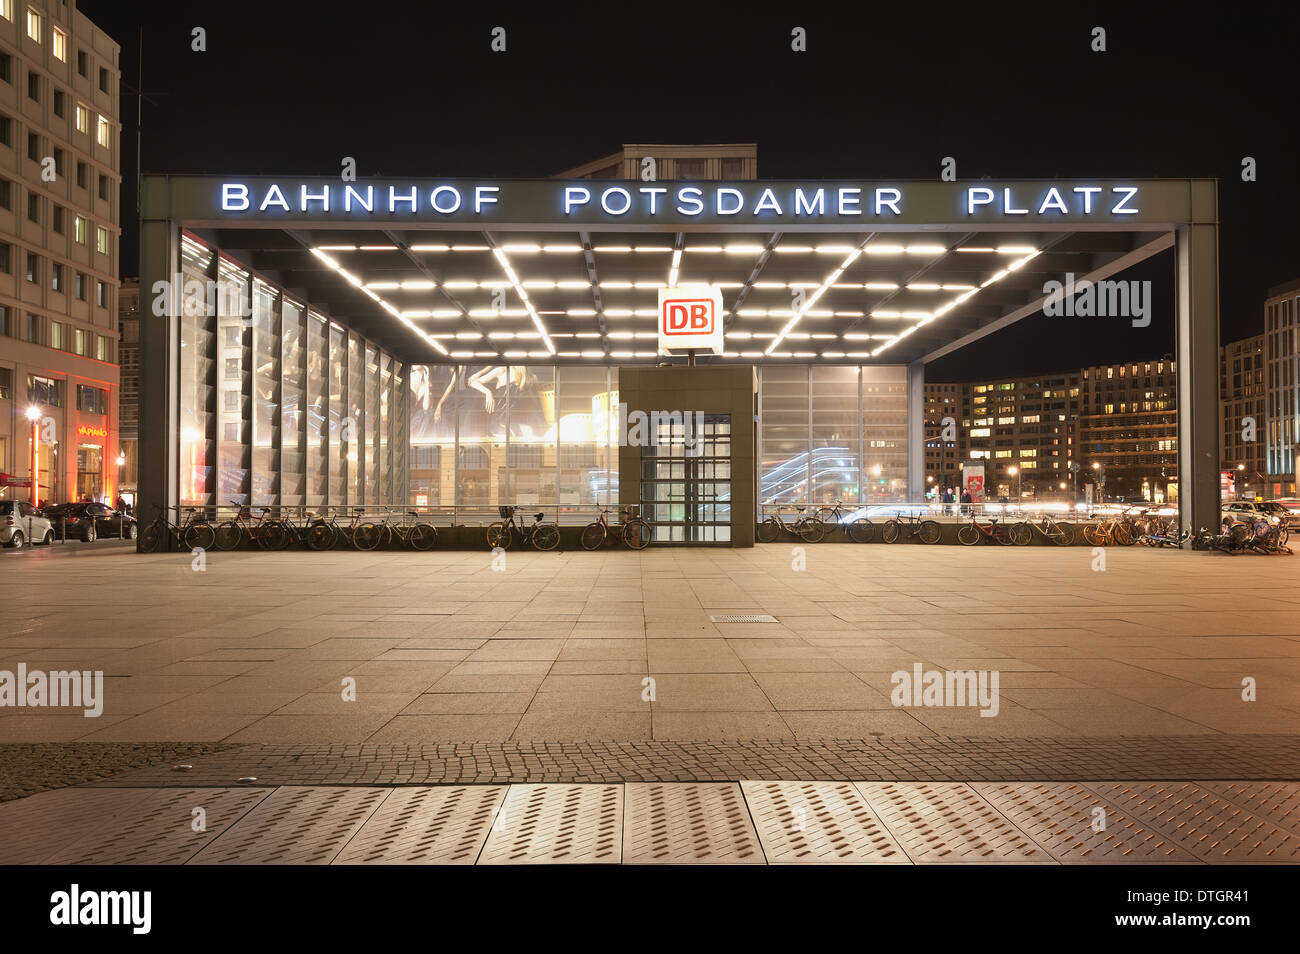 Potsdamer platz Bahnhof mainline station entrance on concourse to trains with rejuvenated city and modern skyline at night Stock Photo